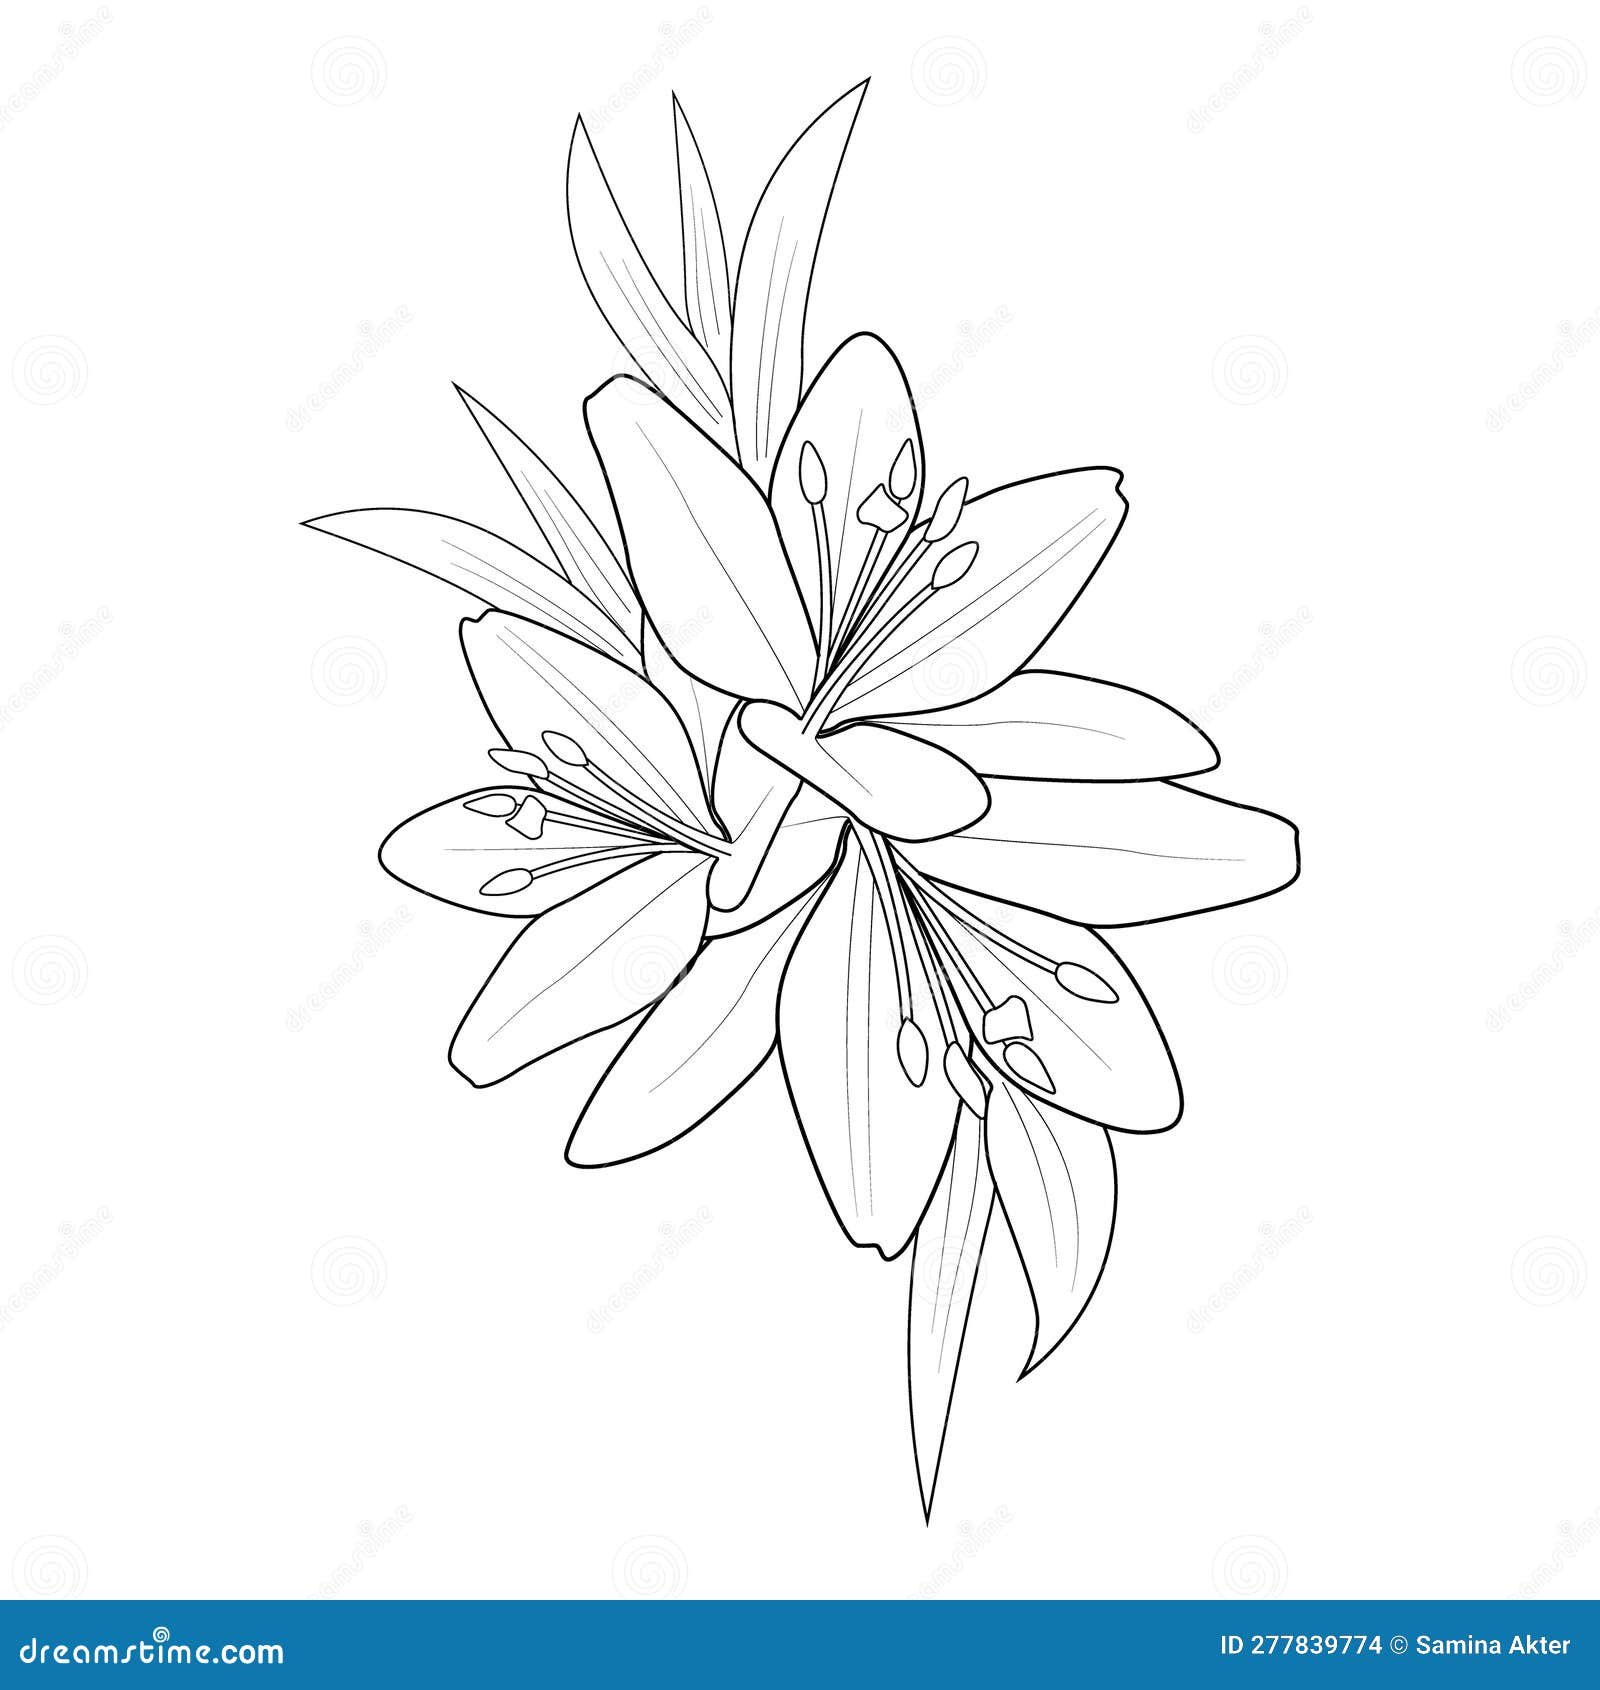 Tattoo Sketch Lily Flower Drawing, Outline Lily Flower Tattoo Designs ...